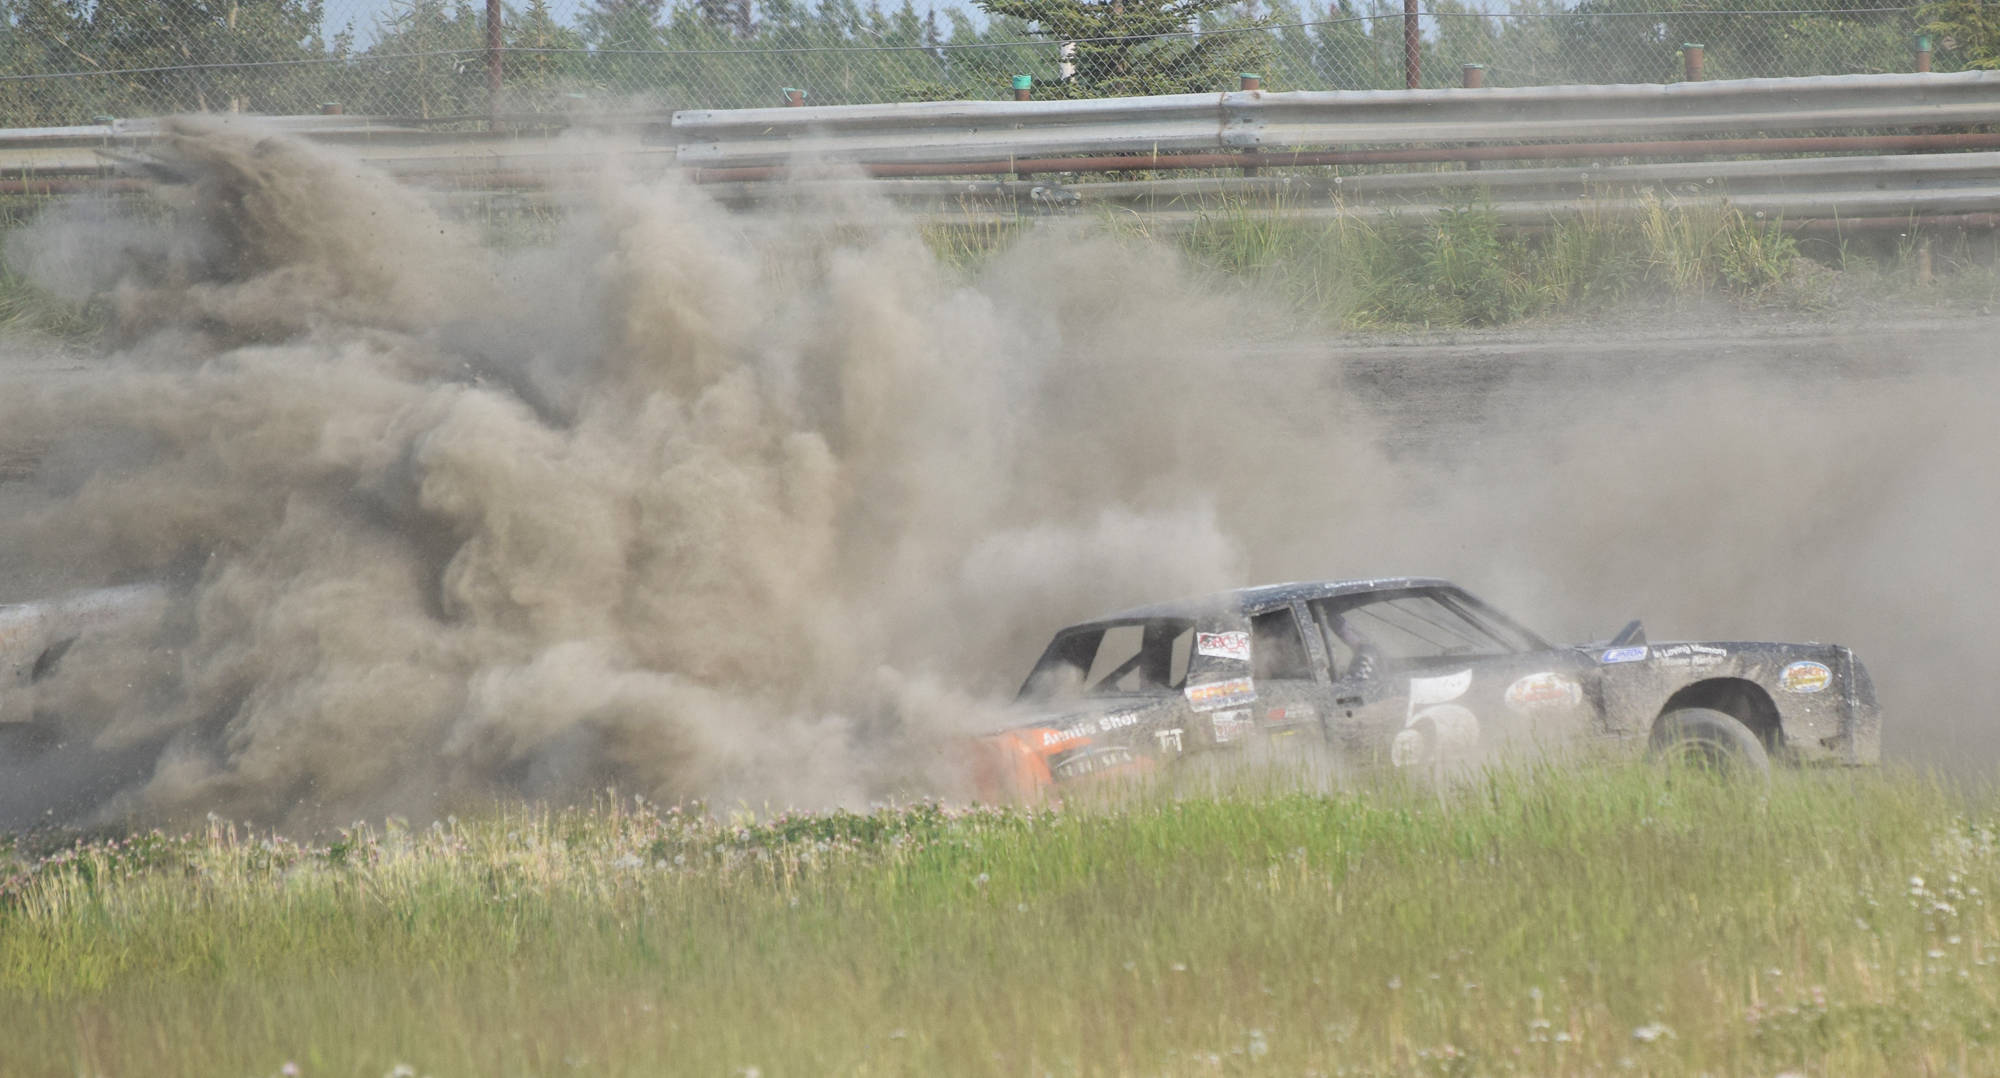 The #5 A-Stock car of Bridgette Attleson spins out in the dirt Saturday, June 29, 2019, at Twin Cities Raceway in Kenai, Alaska. (Photo by Joey Klecka/Peninsula Clarion)